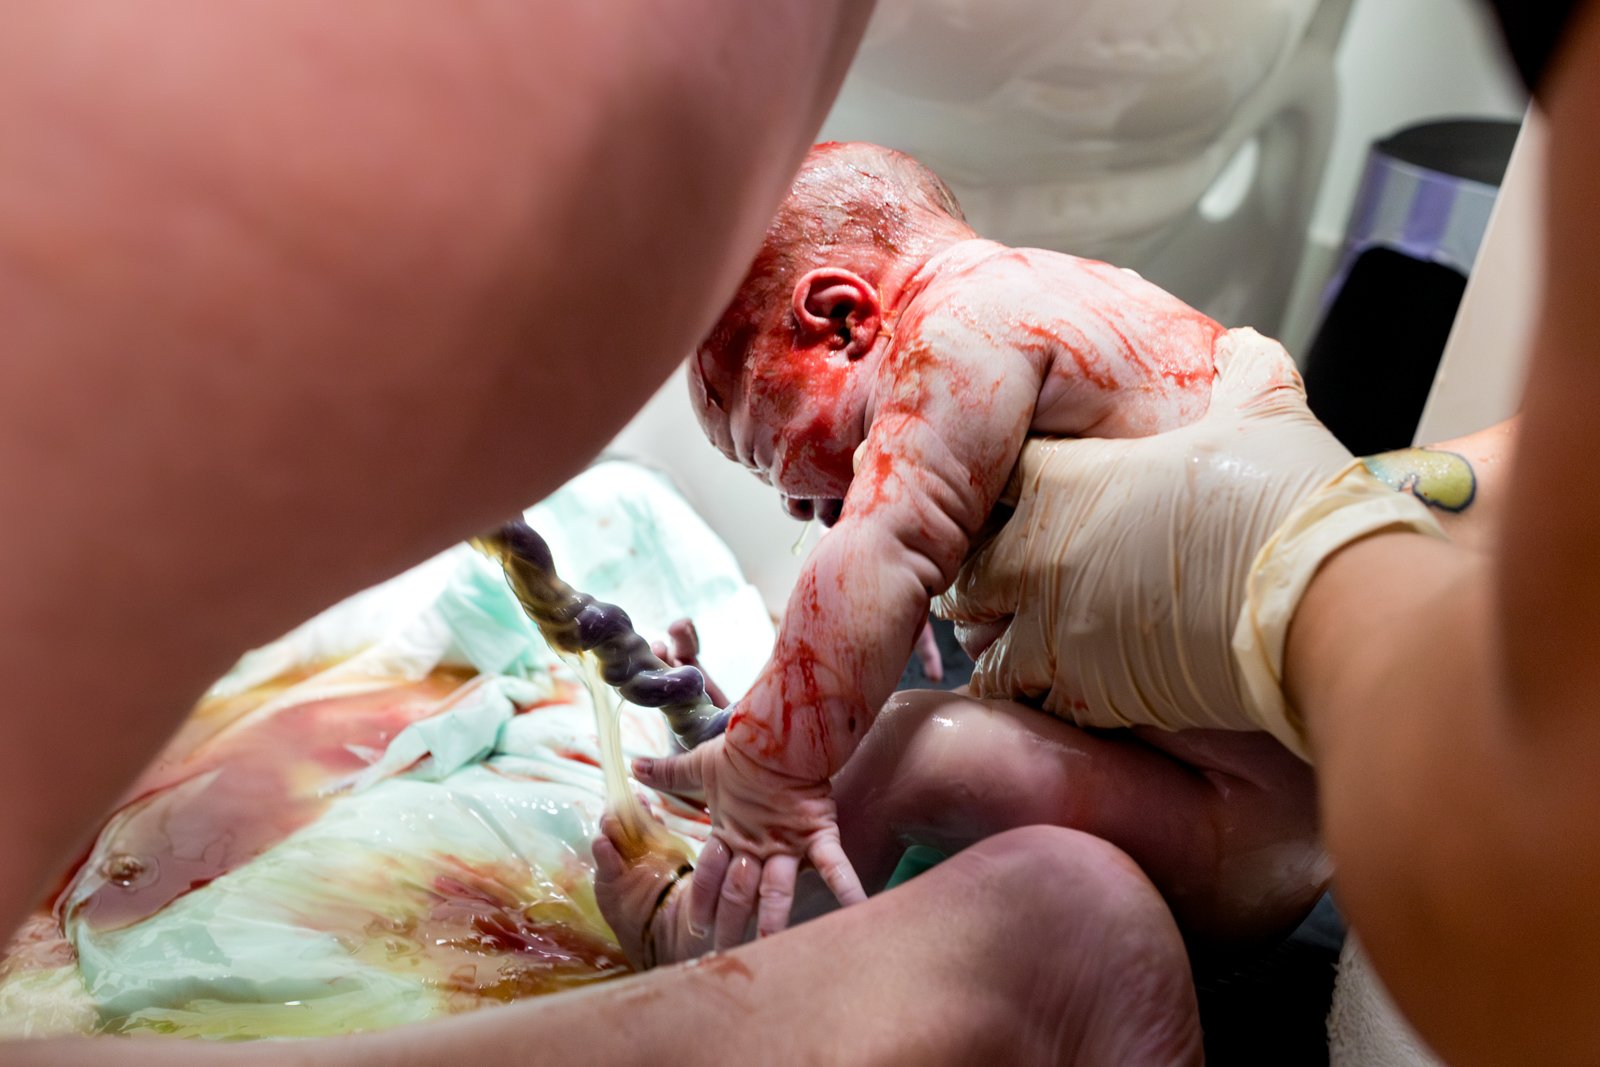 midwife catching baby during birth